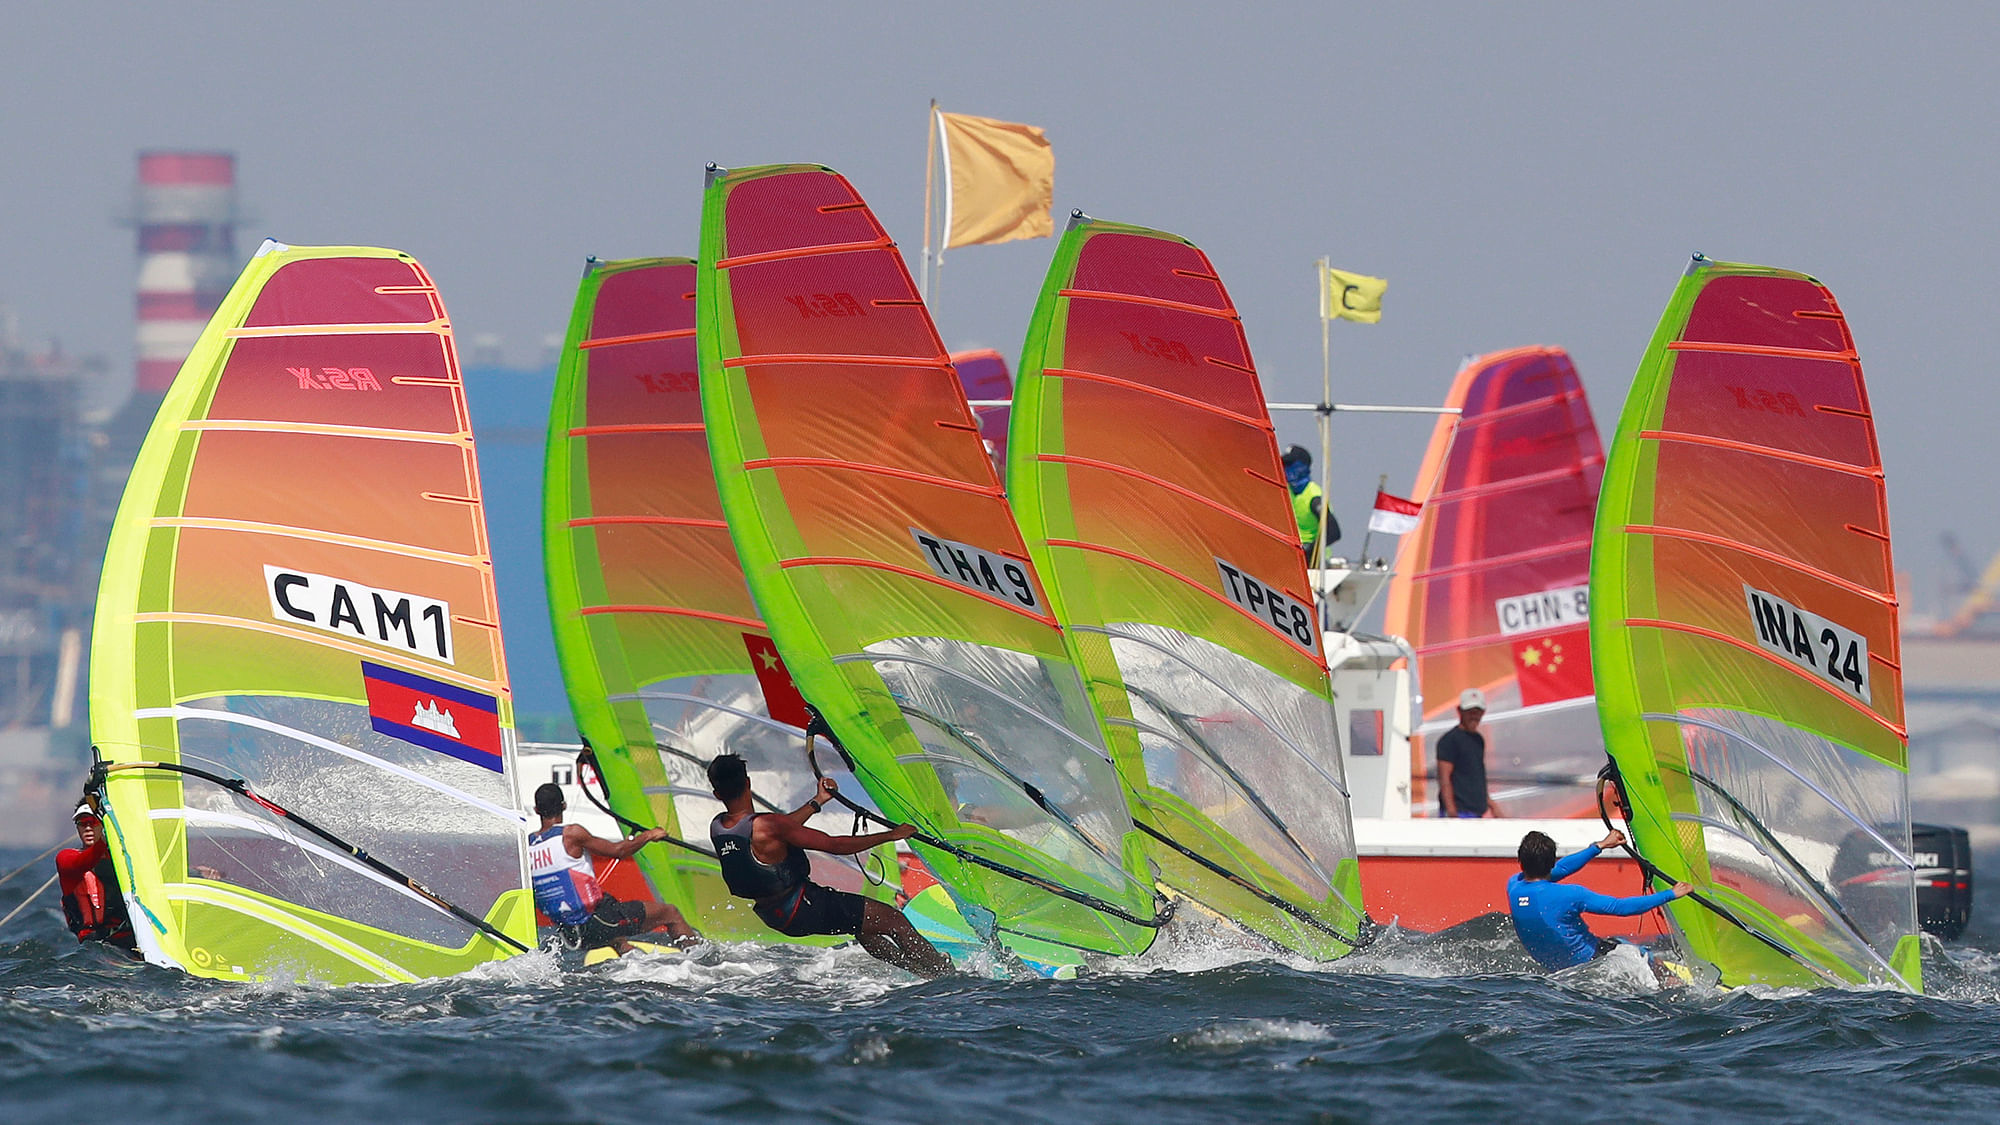 India have won three medals in sailing on Day 3 of the 2018 Asian Games.